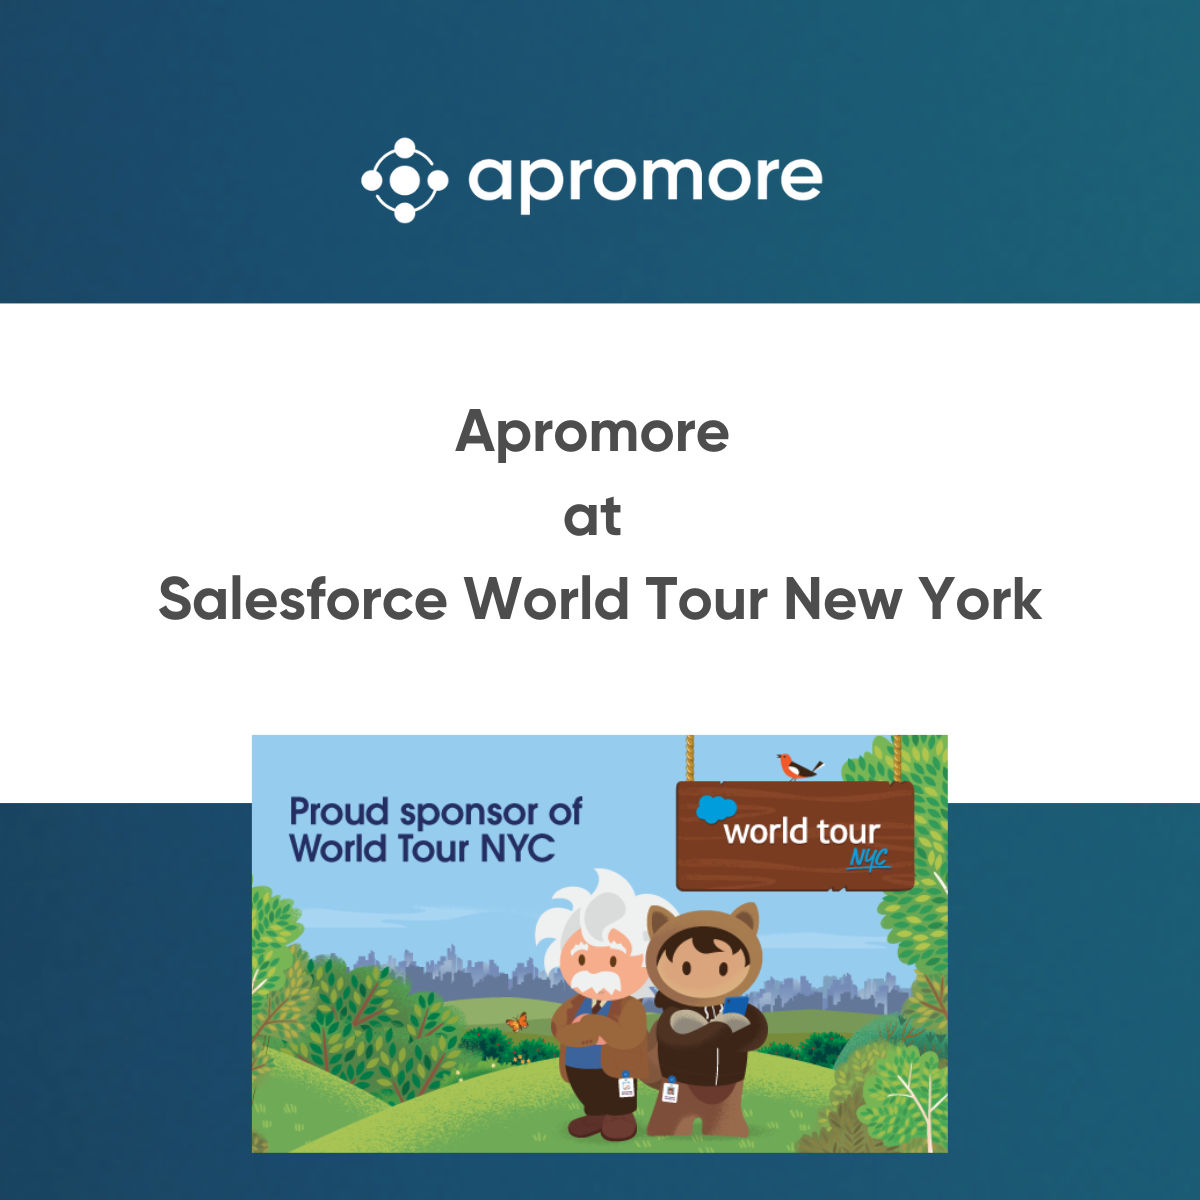 Apromore at Salesforce World Tour New York